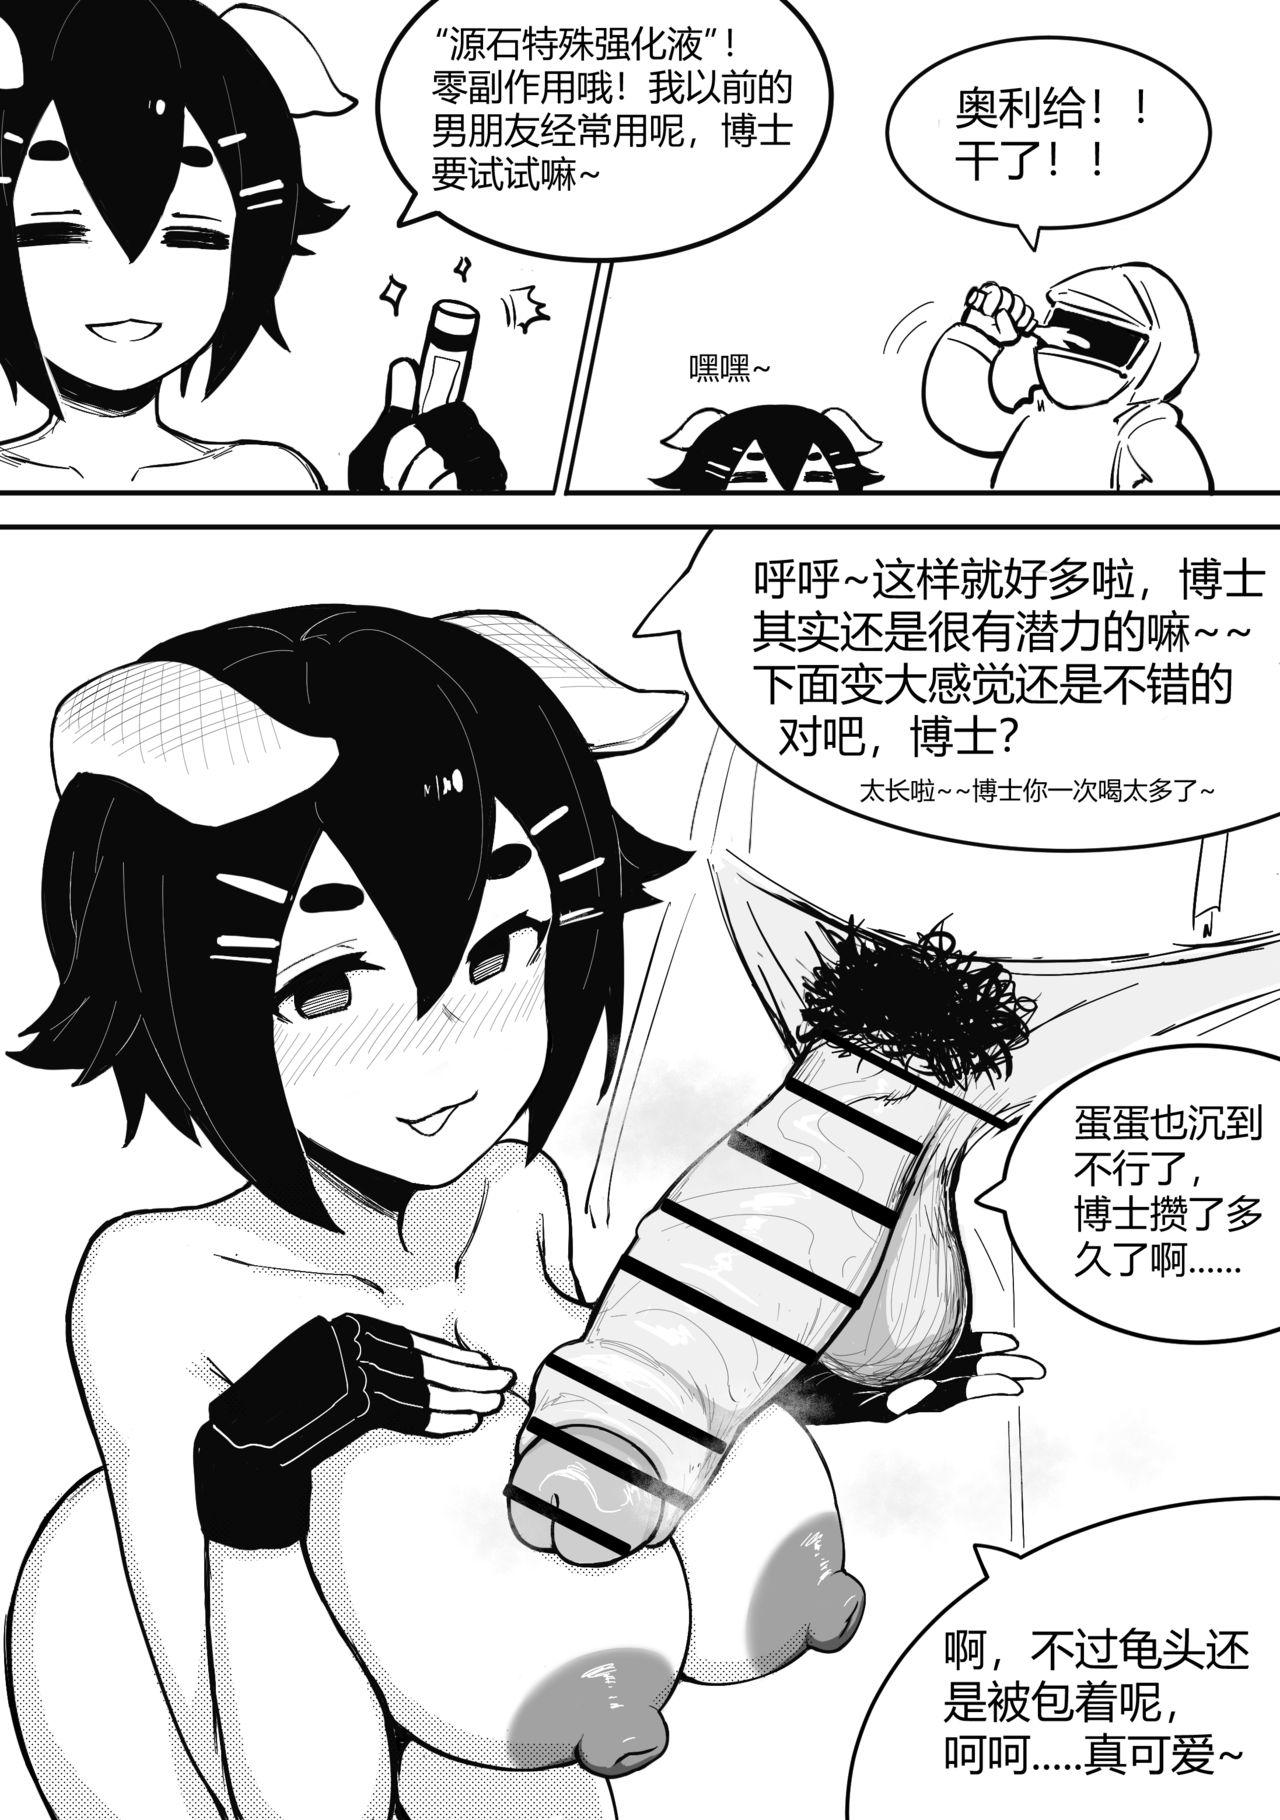 Spain 可爱的杰克【9P】（Arknights） - Arknights Women - Page 4